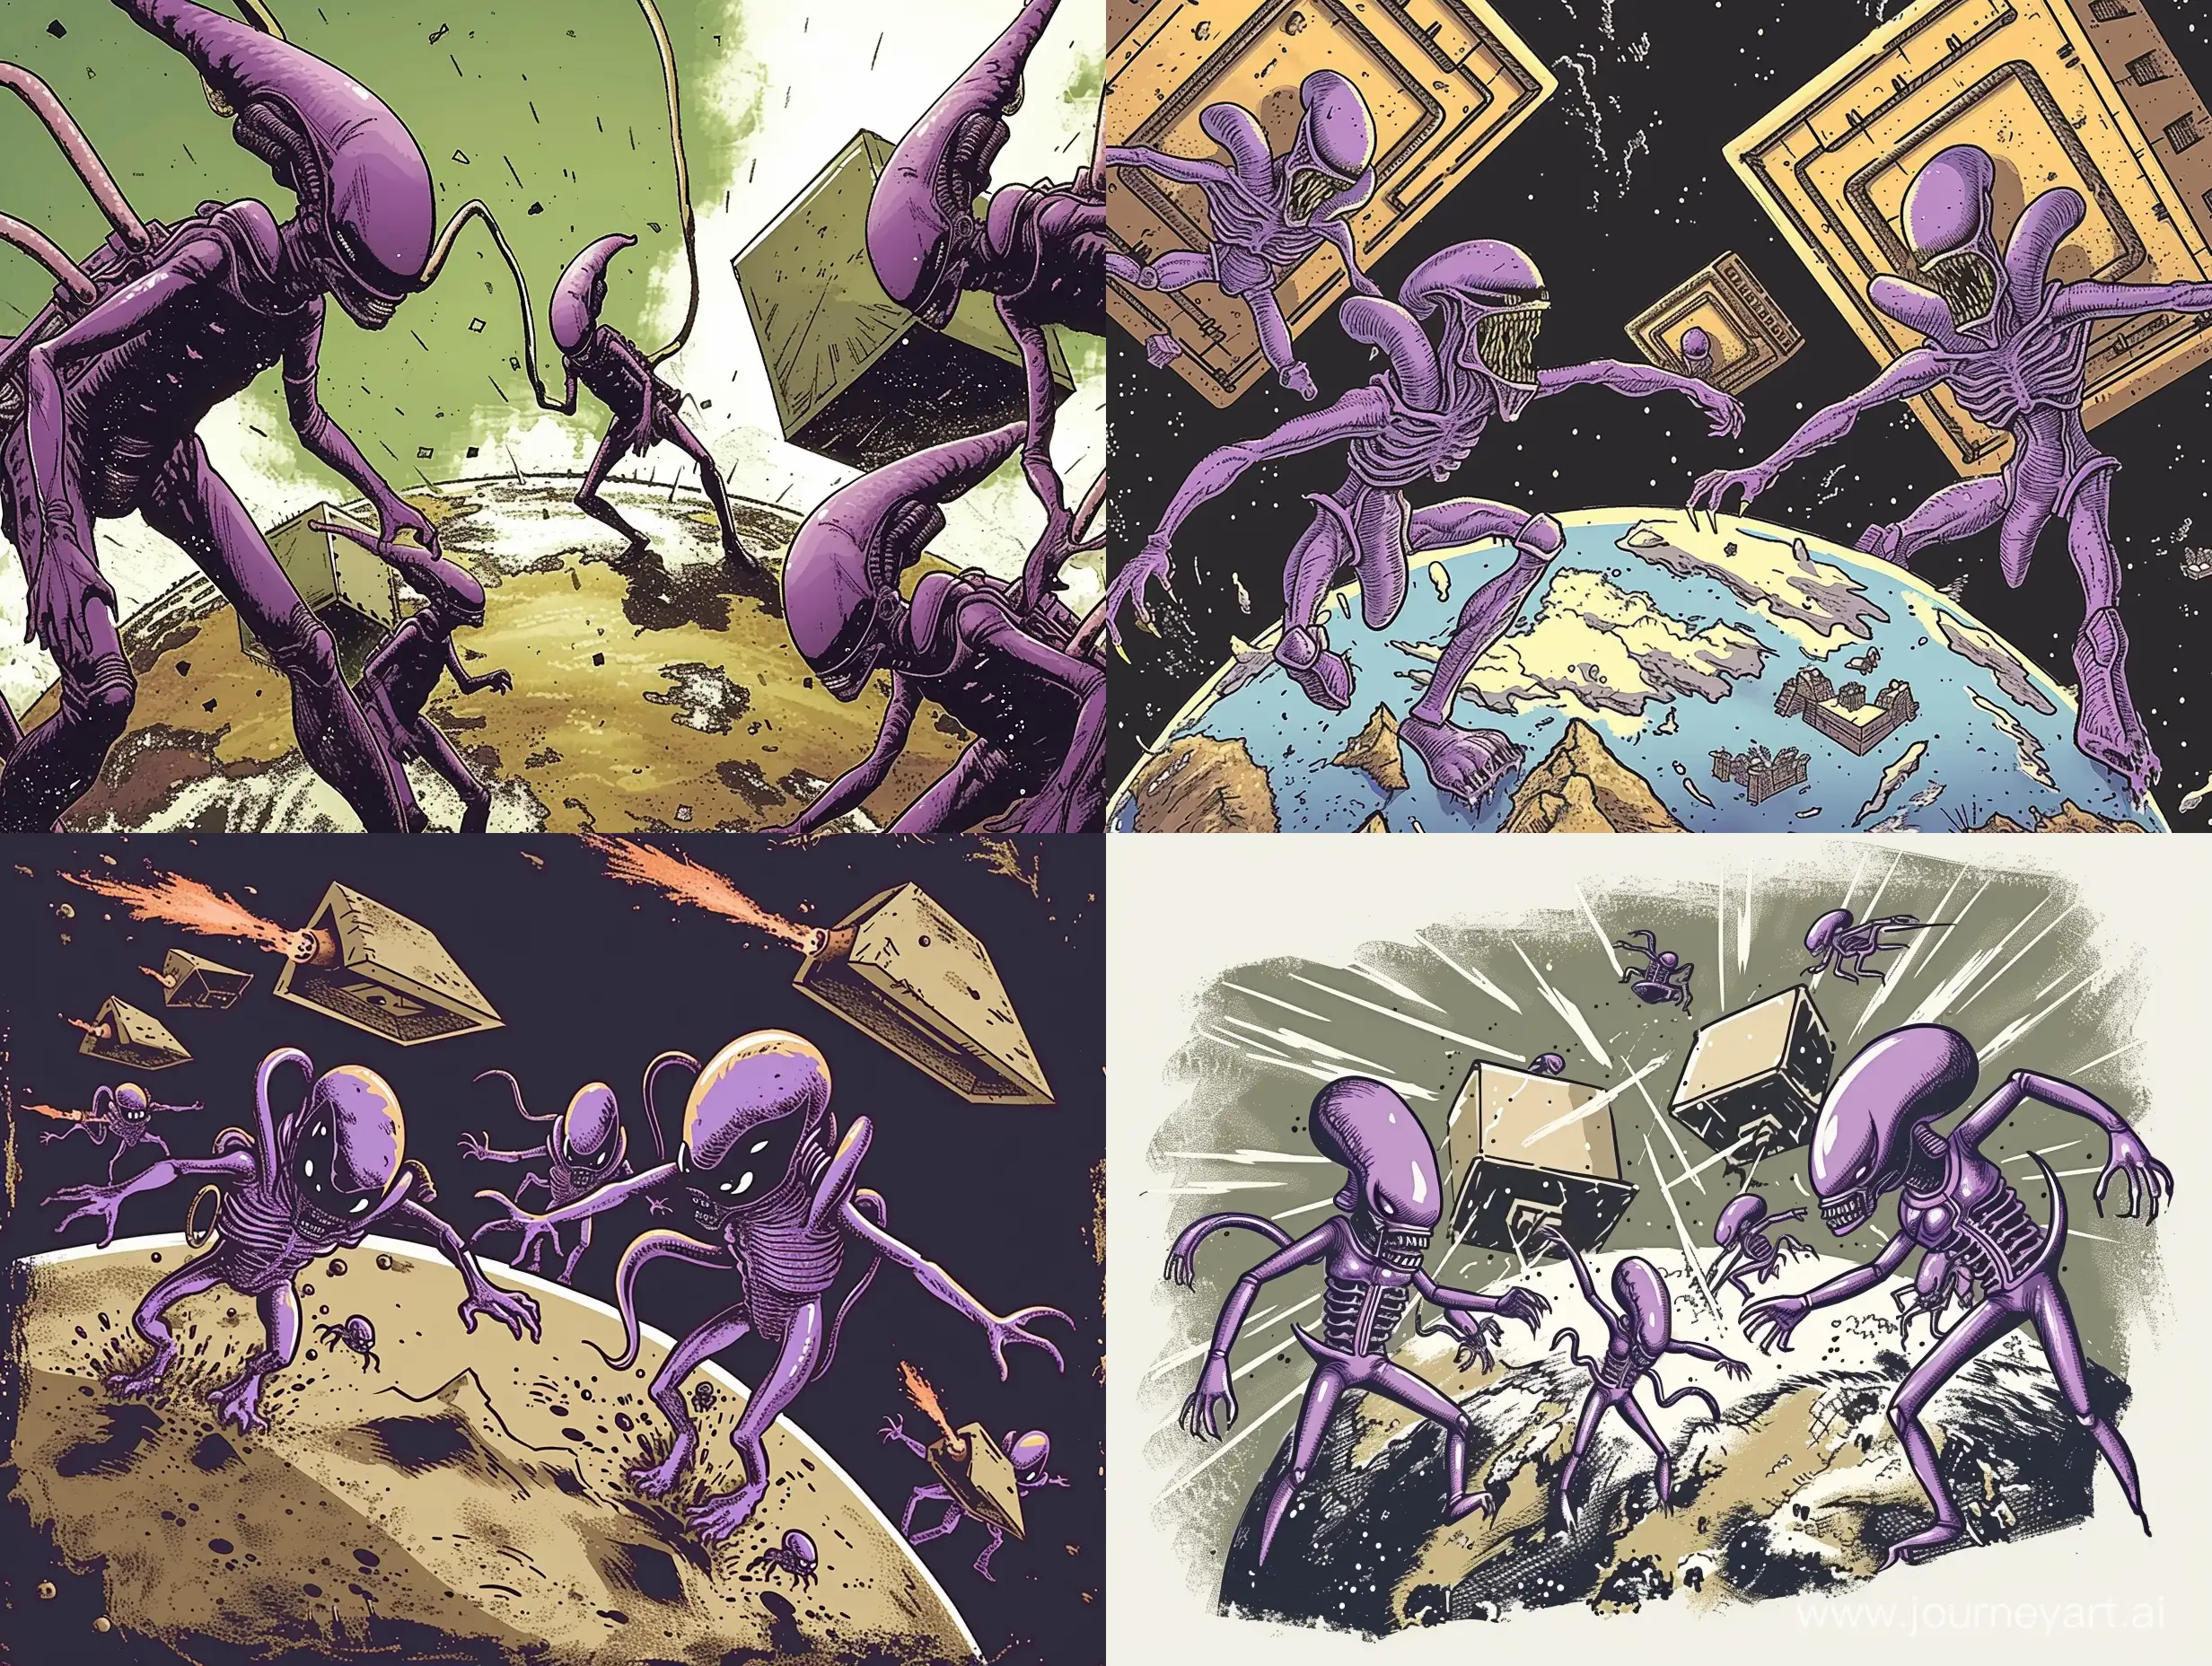 Purple-Colored-Aliens-Attack-Earth-with-Square-Spaceships